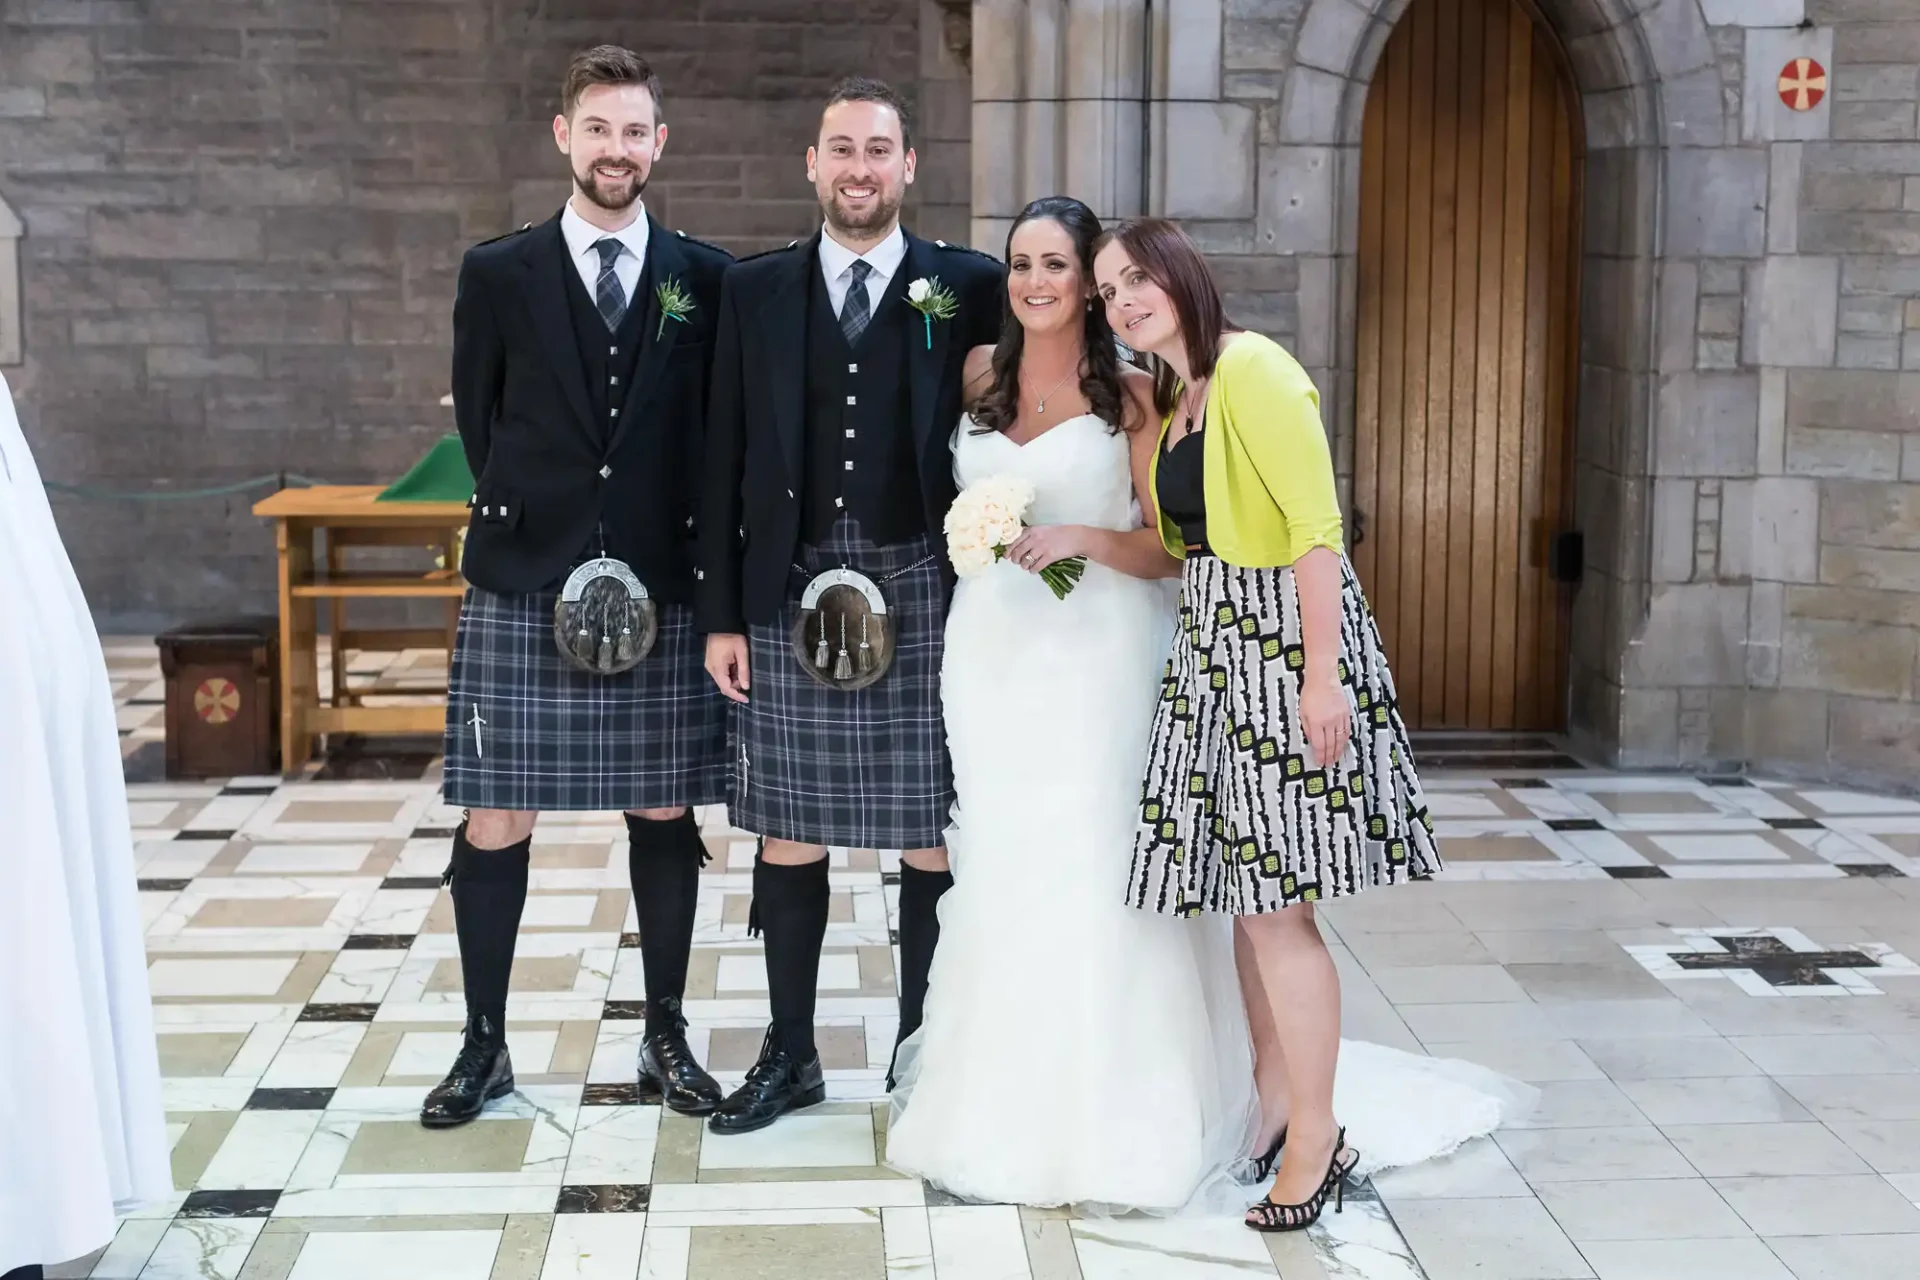 Two men in kilts and a bride and bridesmaid pose smiling inside a church.